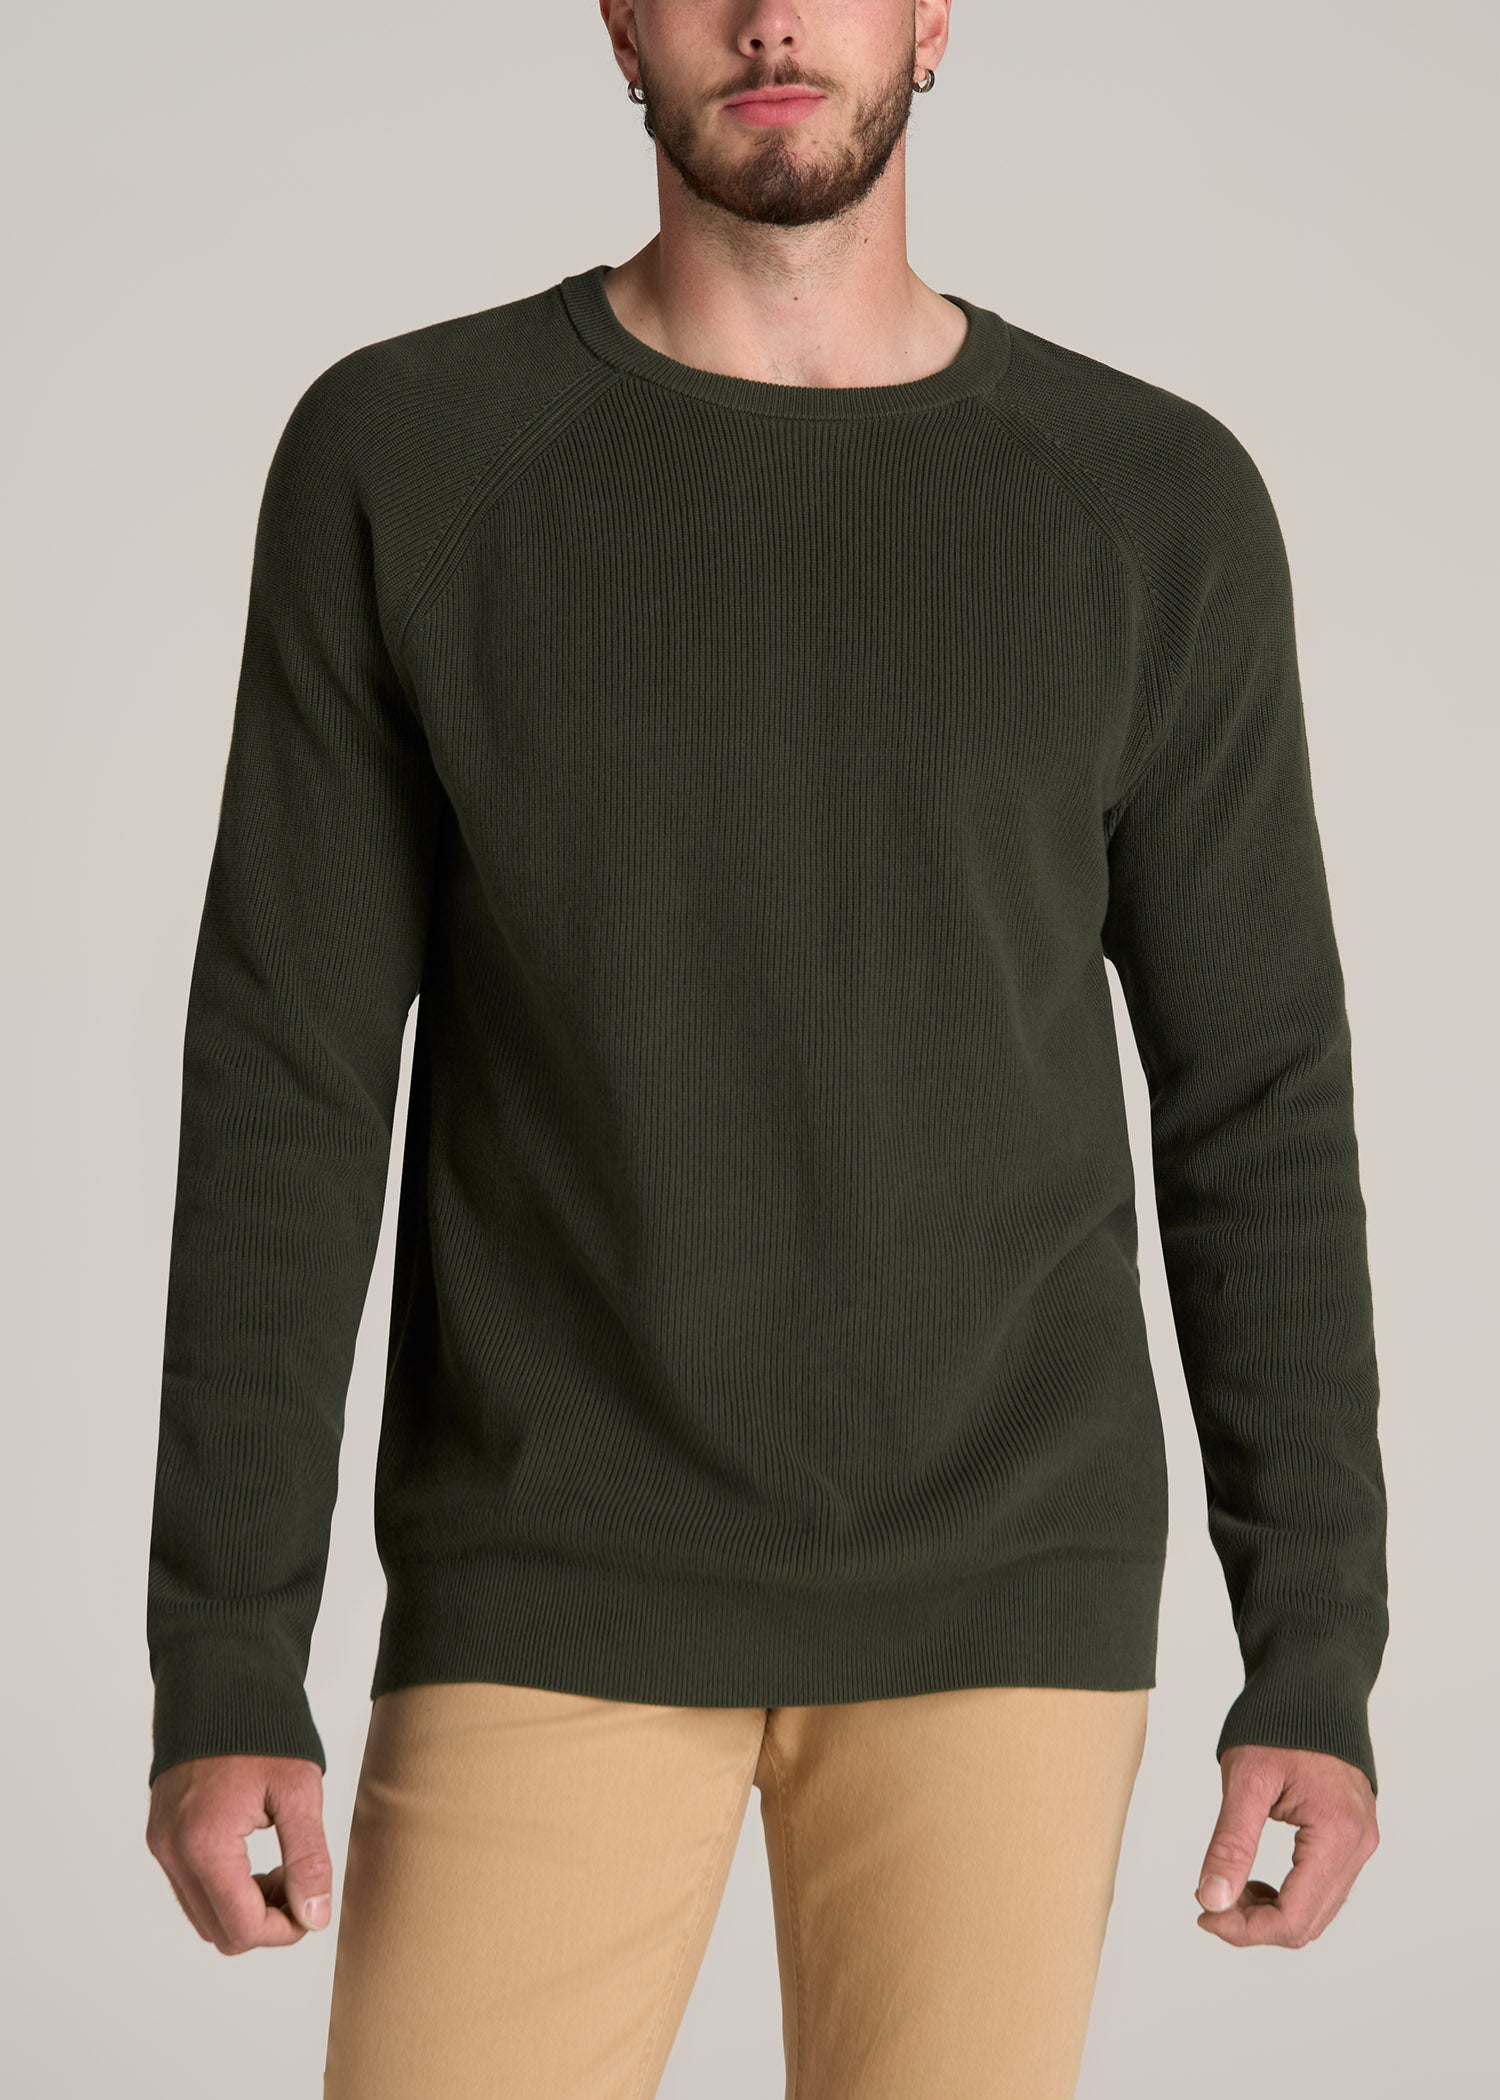 Textured Knit Sweater for Tall Men